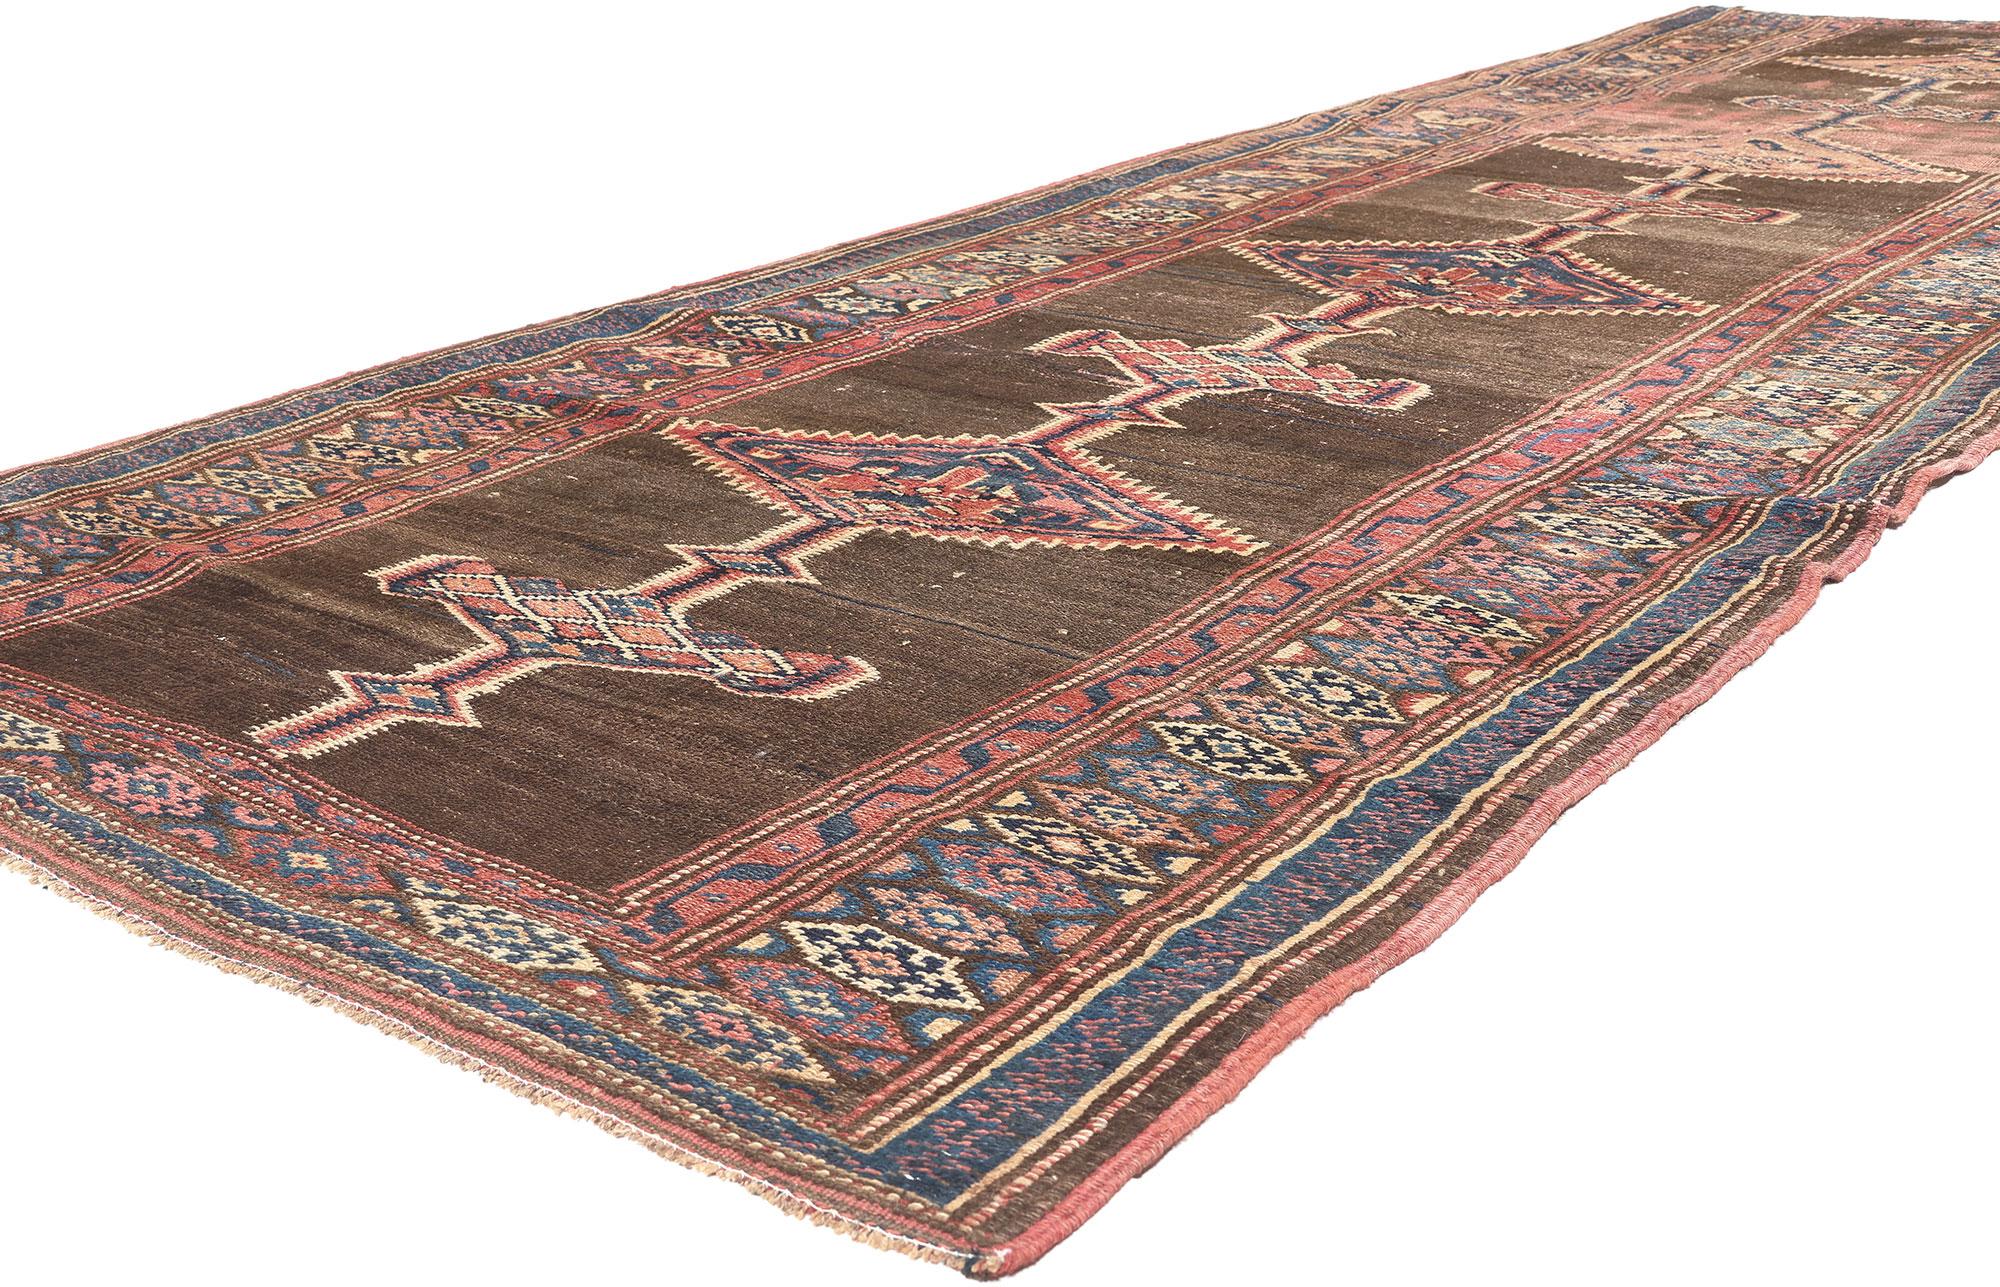 61262 Antique Persian Sarab Rug, 04'04 x 13'02.
Natural elegance meets tribal style in this hand knotted wool antique Persian Sarab rug runner.

Rendered in variegated shades of brown, brick red, blue, tan, coffee, rose, cerulean and beige with